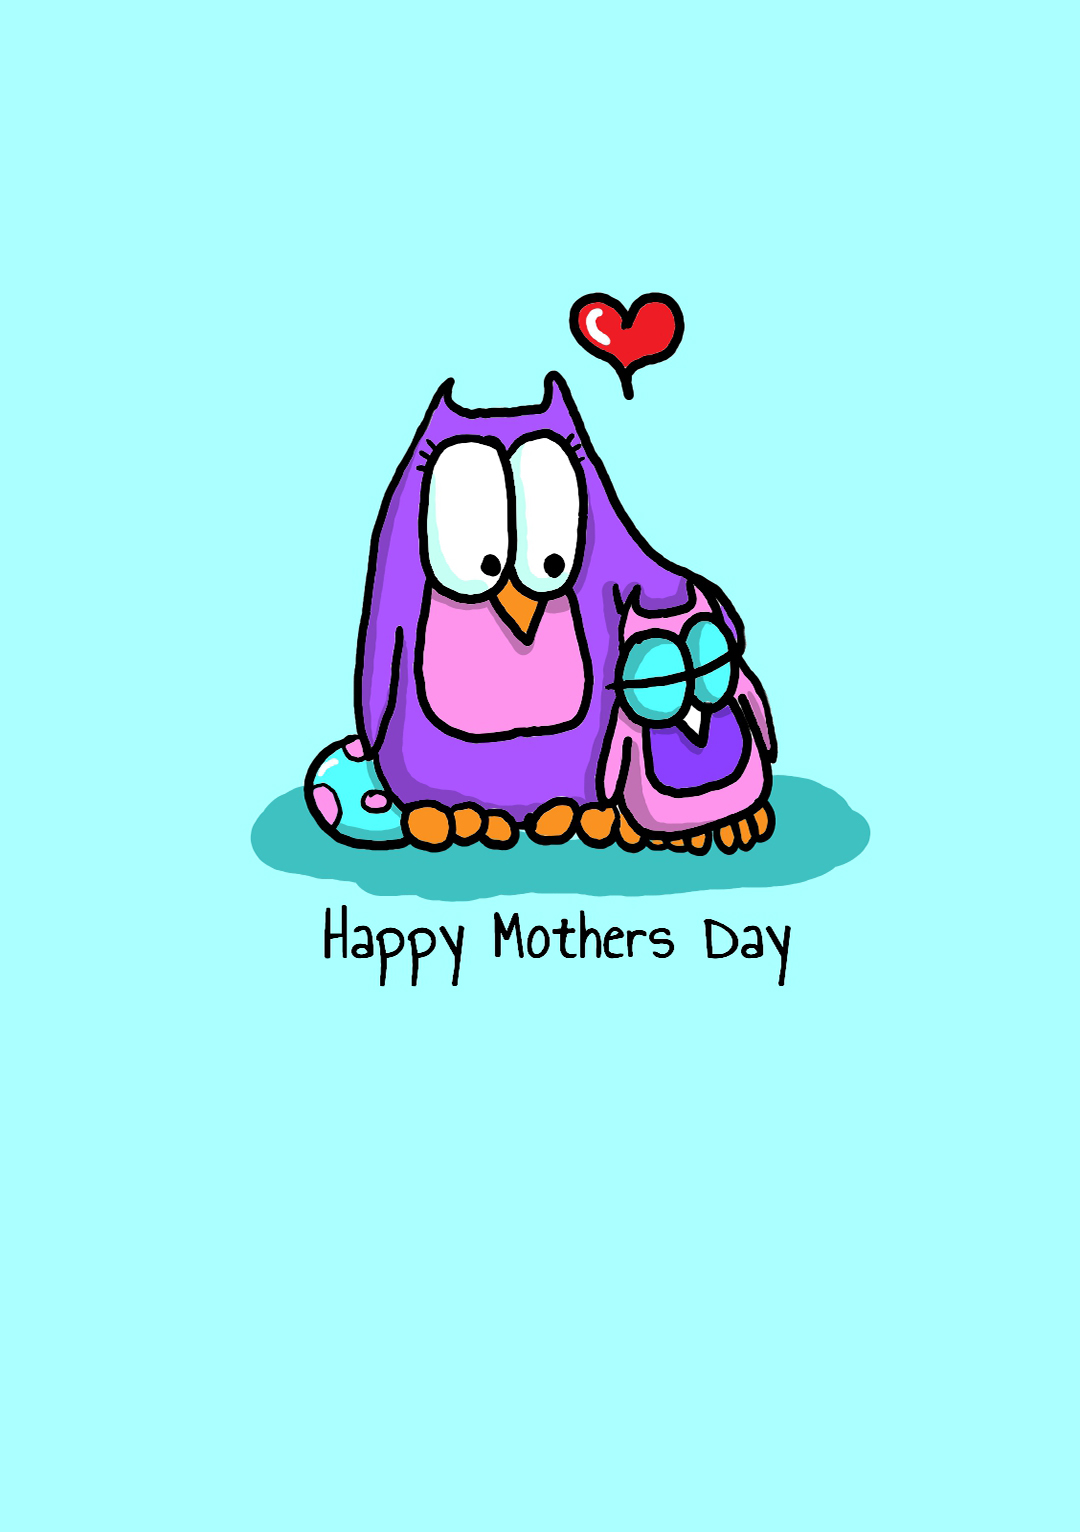 Happy Mother's Day Owl